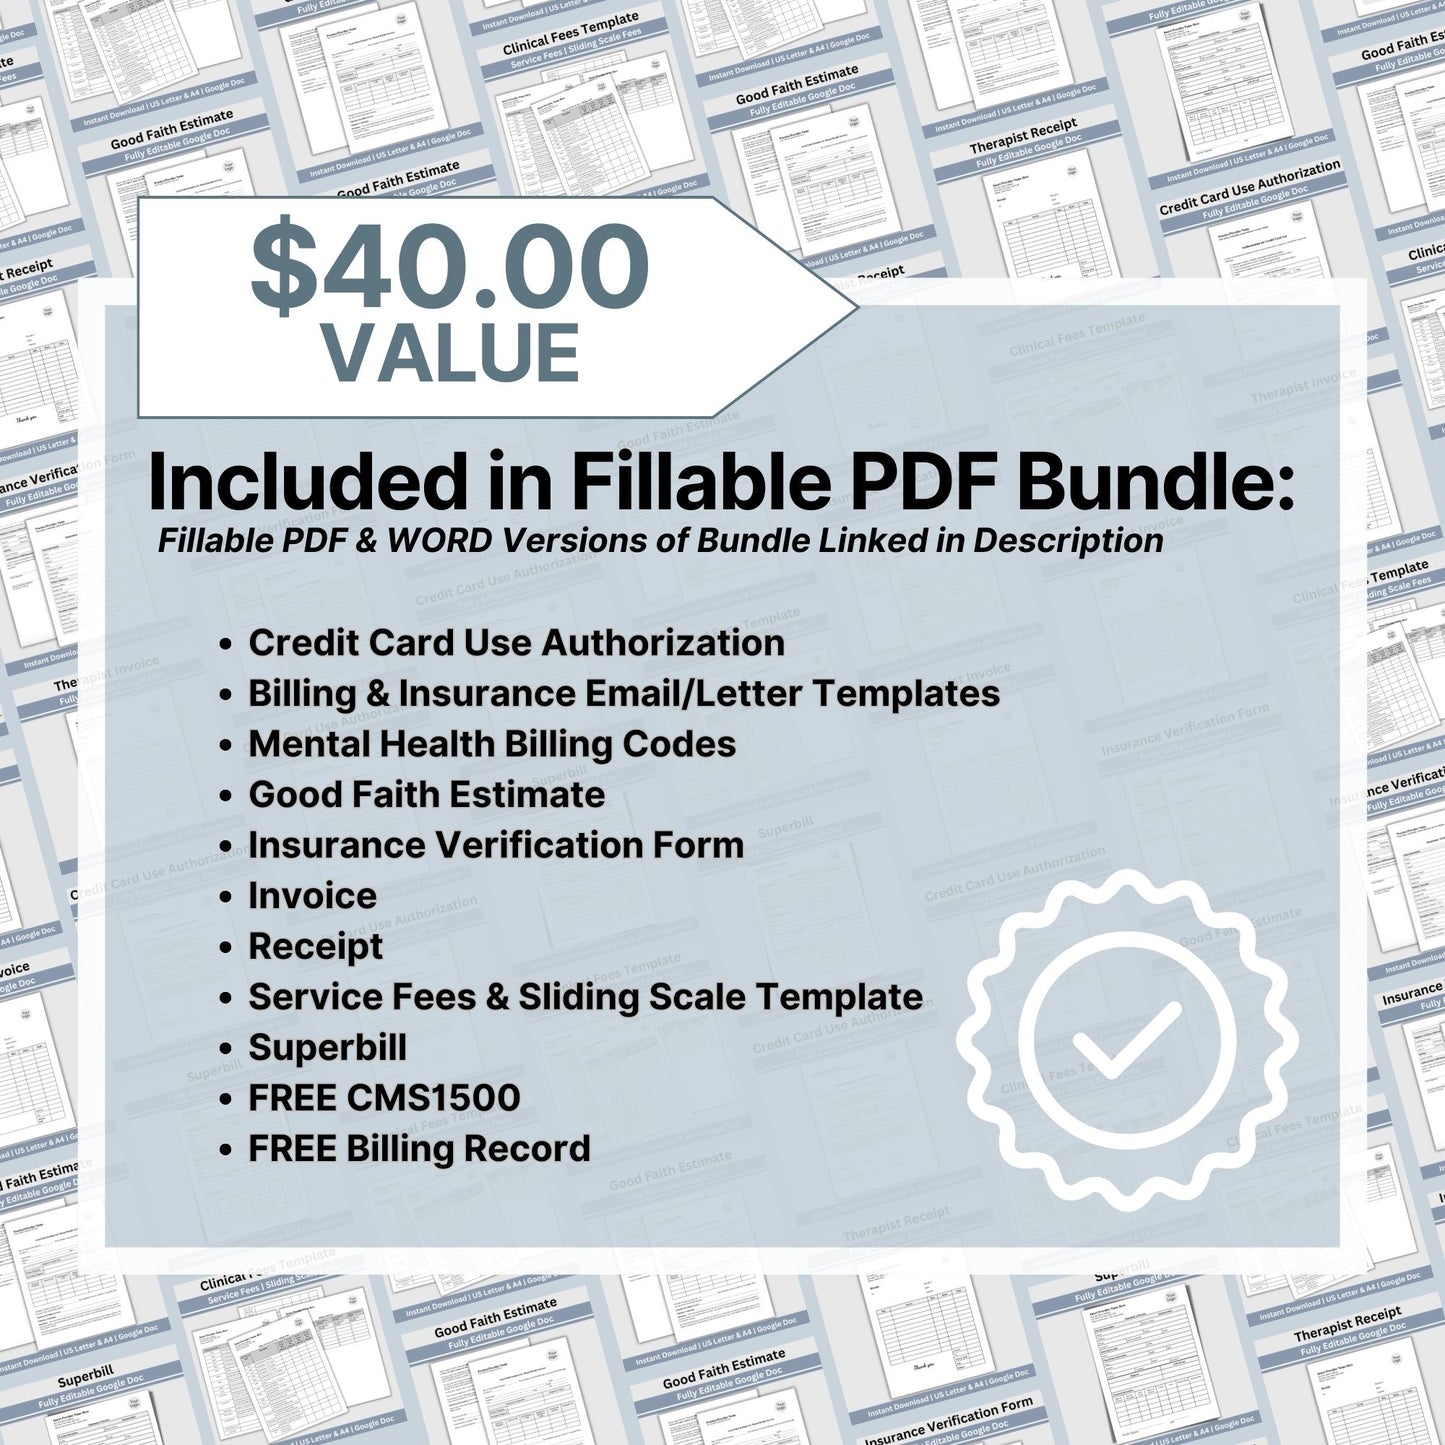 SAVE 35% when you buy our clinical billing bundle for client billing!  Set your private practice up for success with billing/invoicing and insurance tools.  Professional therapist office billing forms with easy to use Google Doc templates.